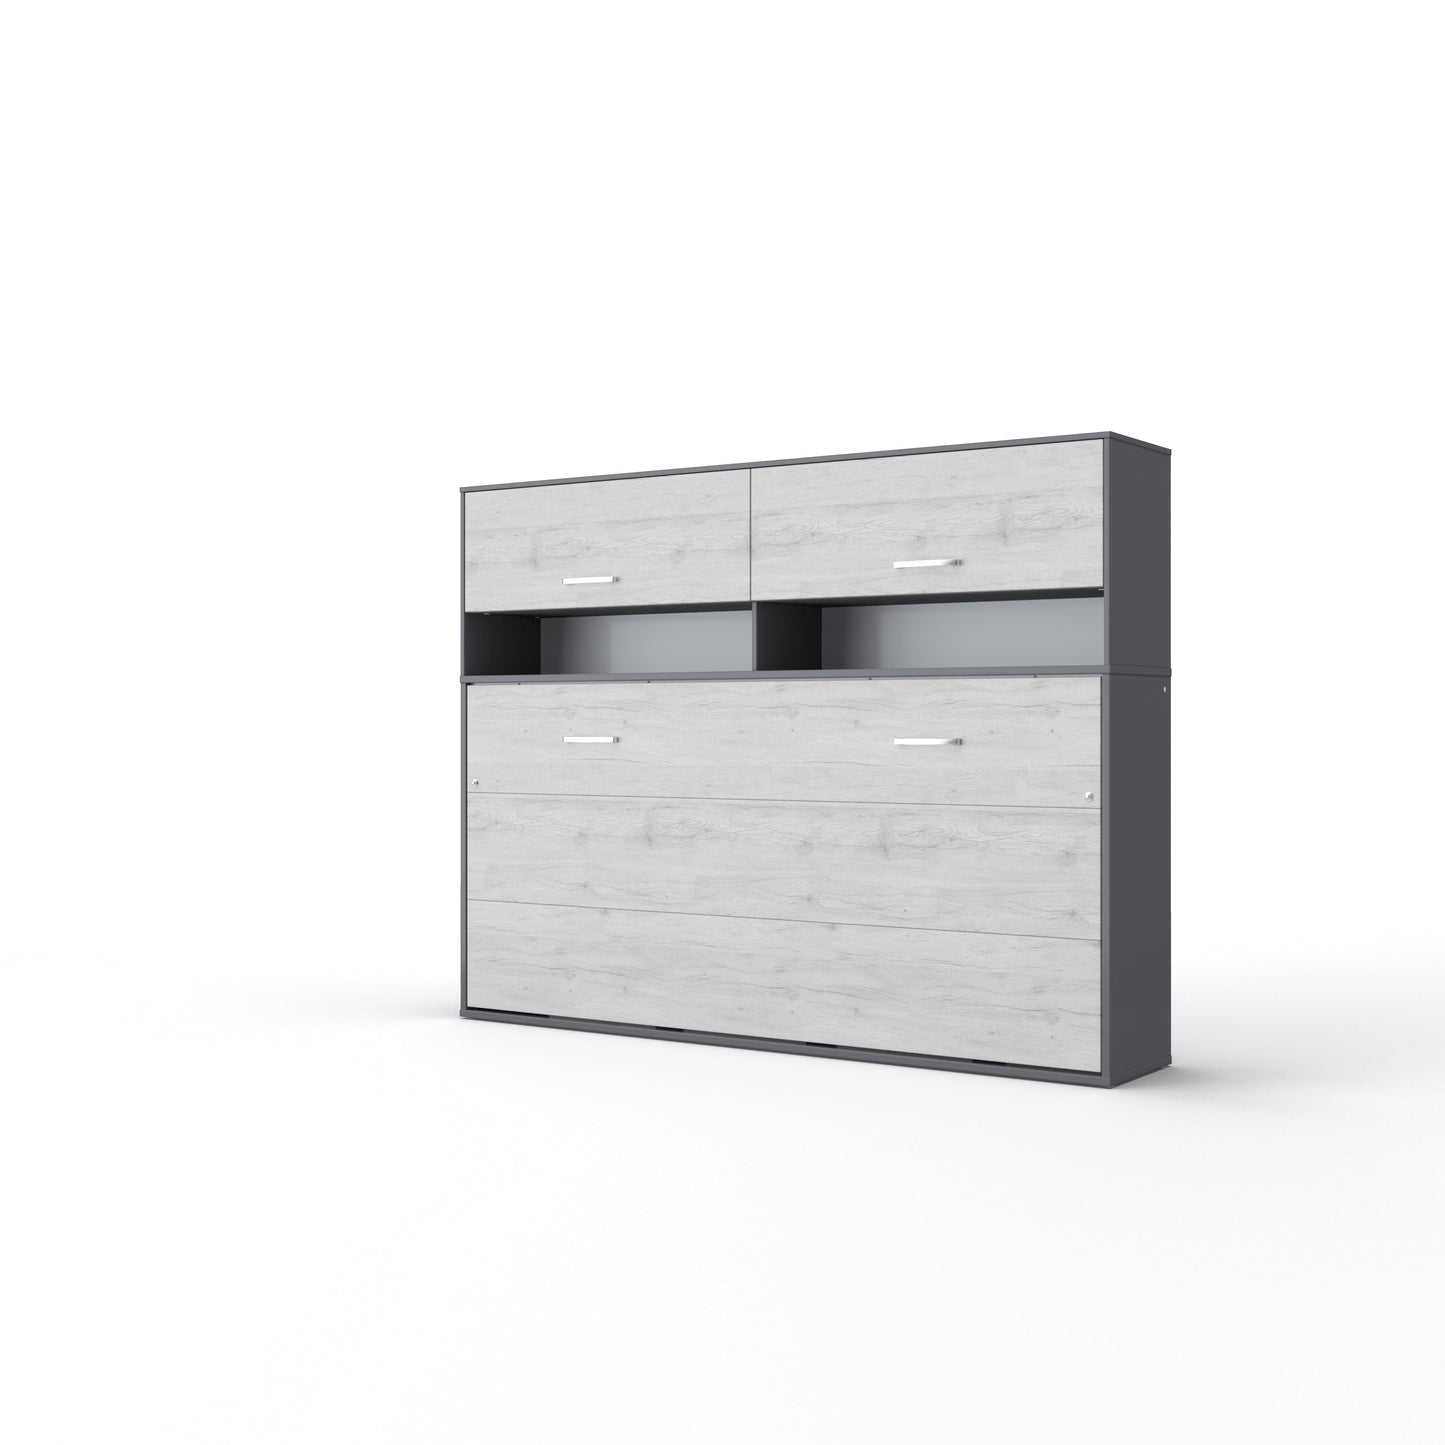 Maxima House Maxima House Invento Horizontal Wall Bed, European Twin Size with a cabinet on top Grey/White Monaco IN90H-11GW